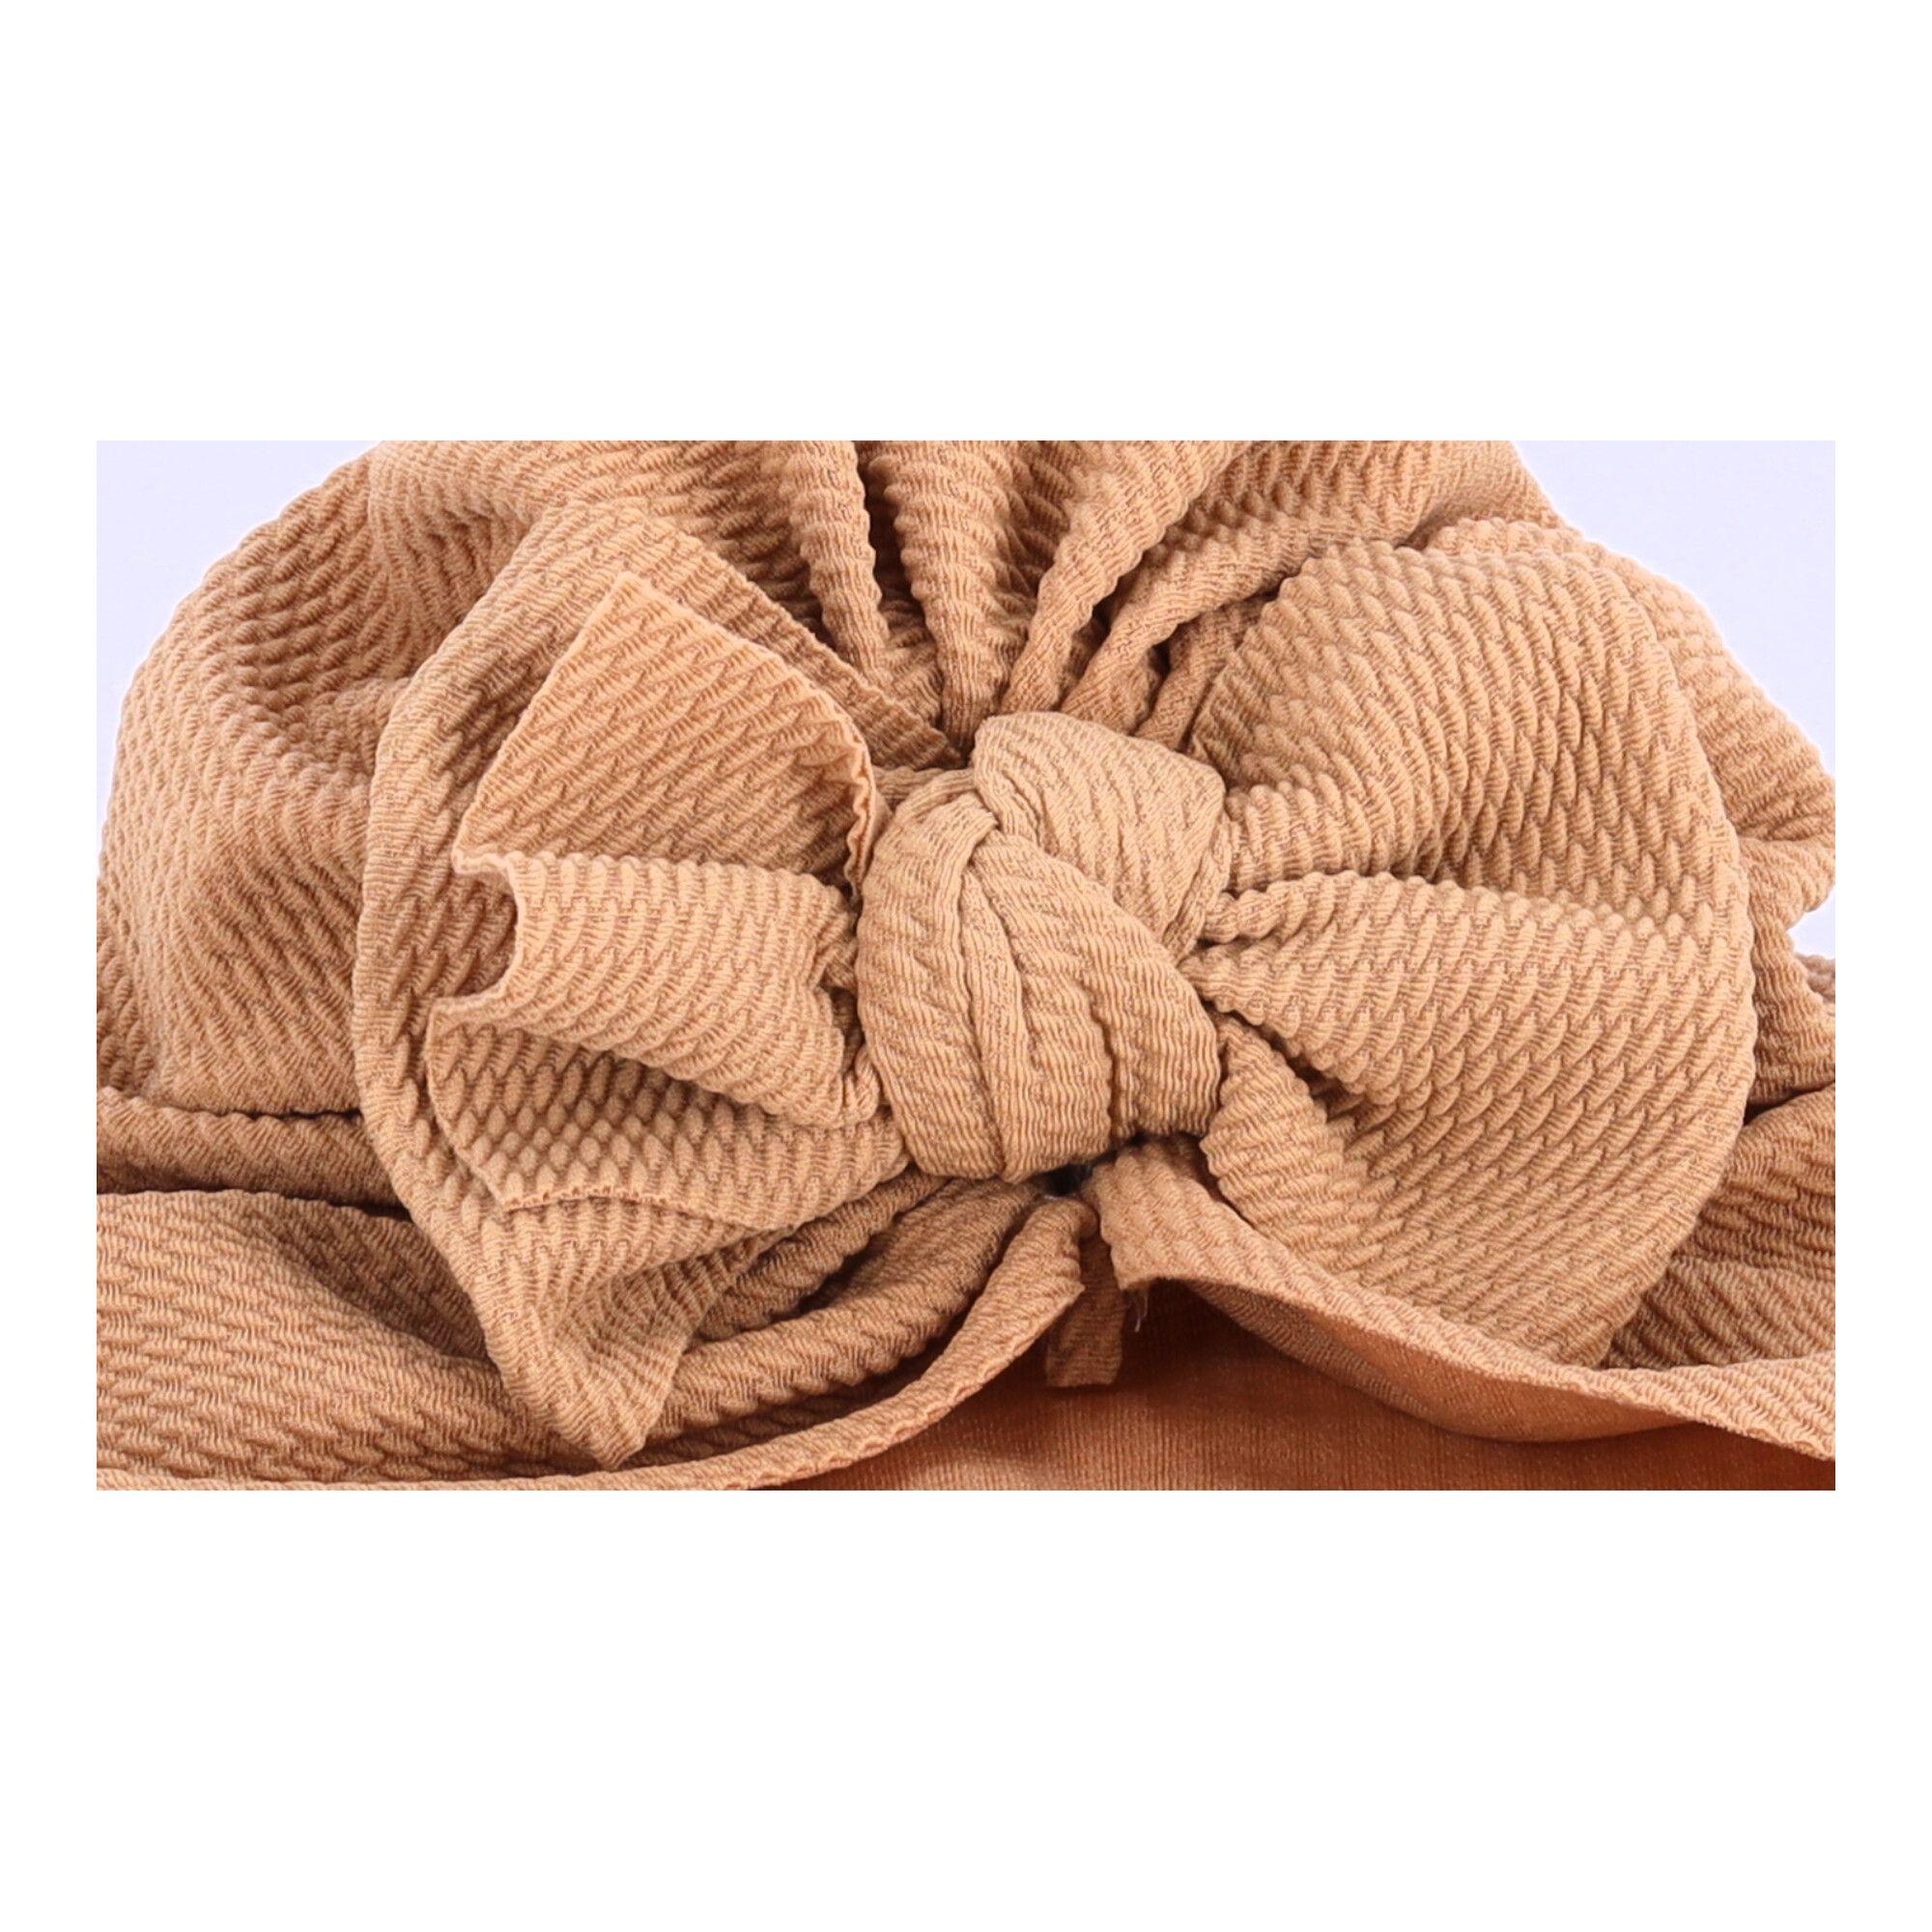 Baby turban with a bow, girl's hat - brown